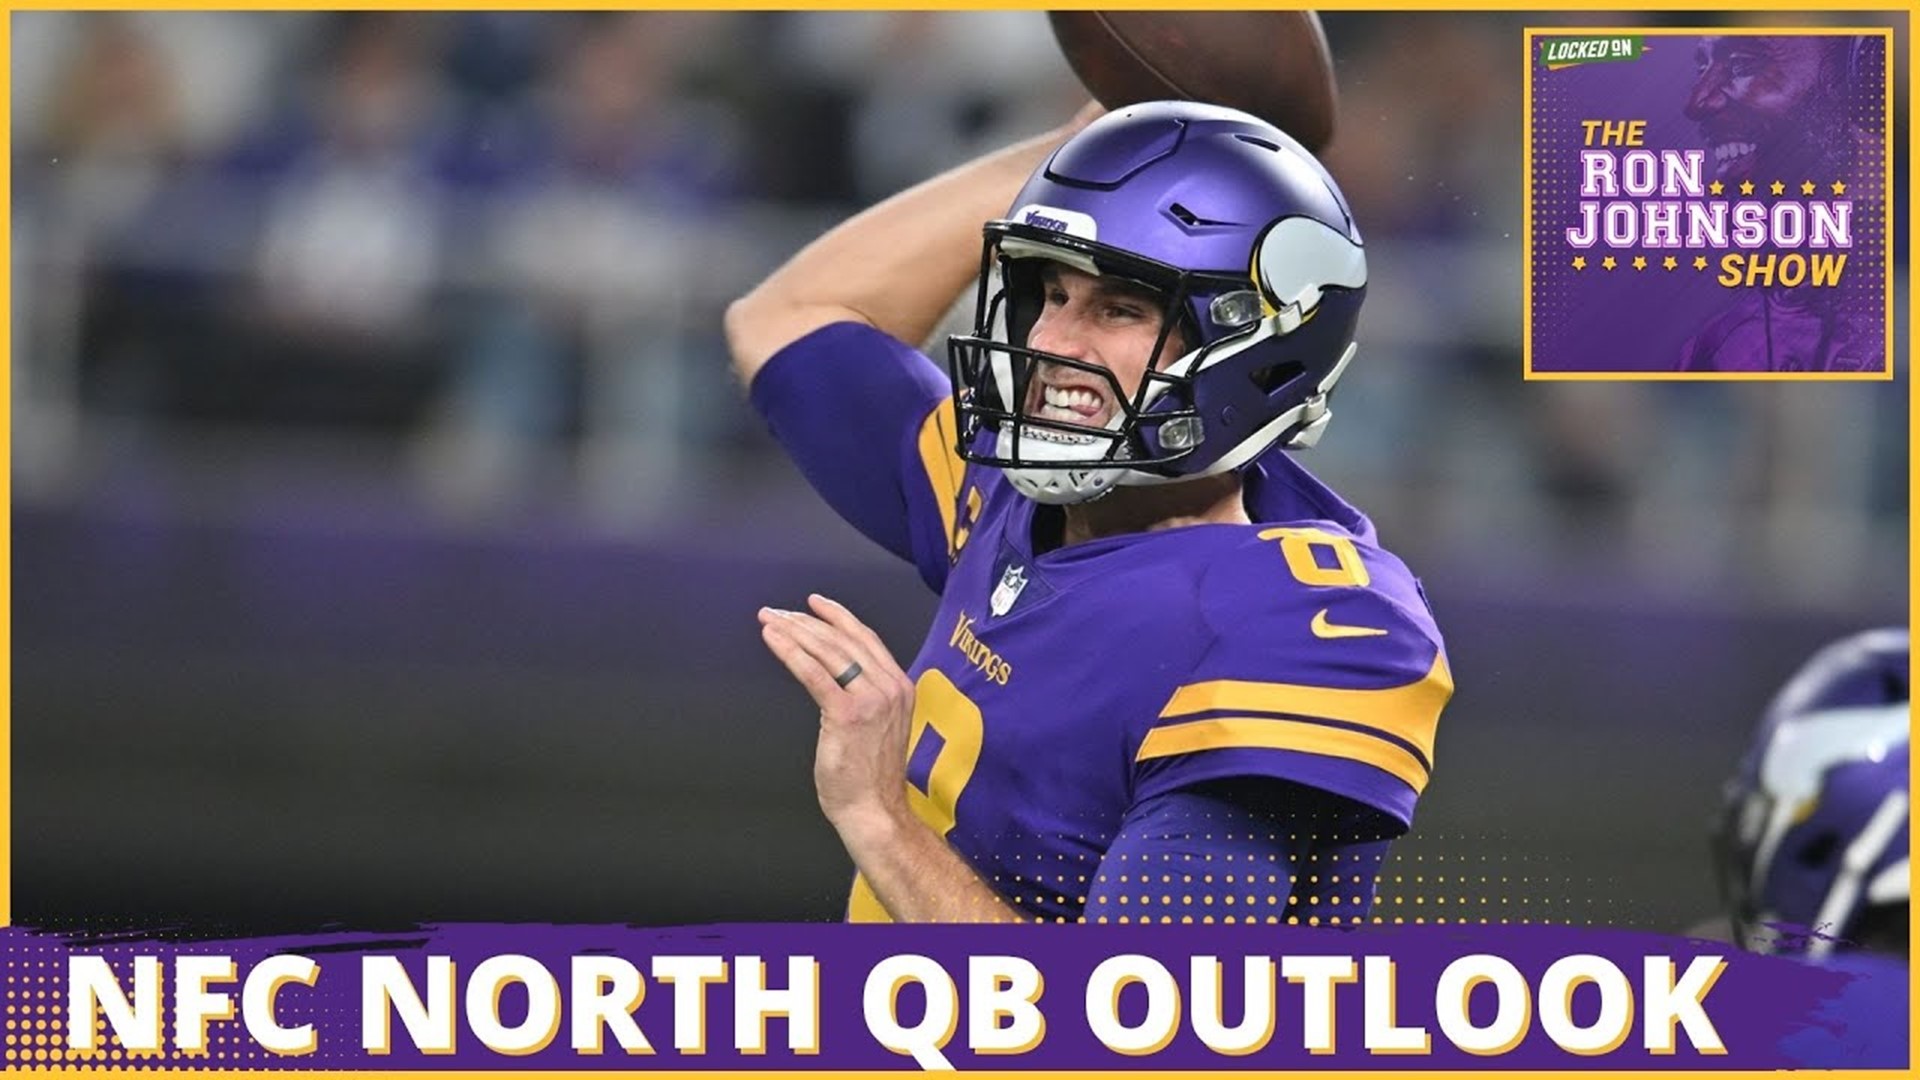 The potential of an Aaron Rodgers trade could pave the way for Kirk Cousins to lead the Minnesota Vikings back to an NFC North crown.